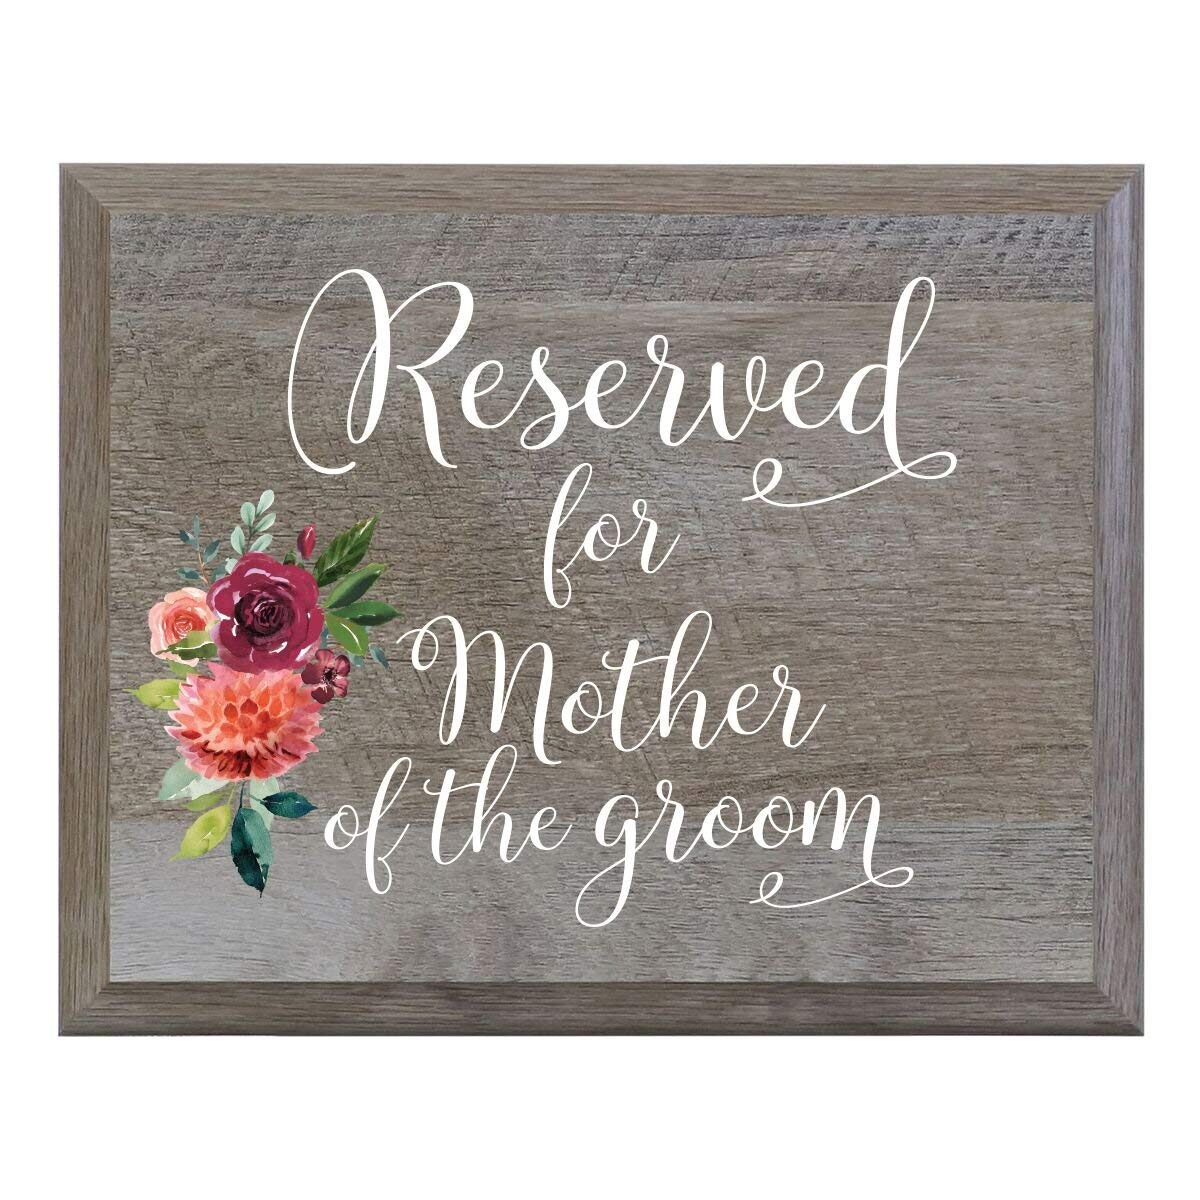 Wedding Ceremony Party Sign - Reserved For Mother Of The Groom.